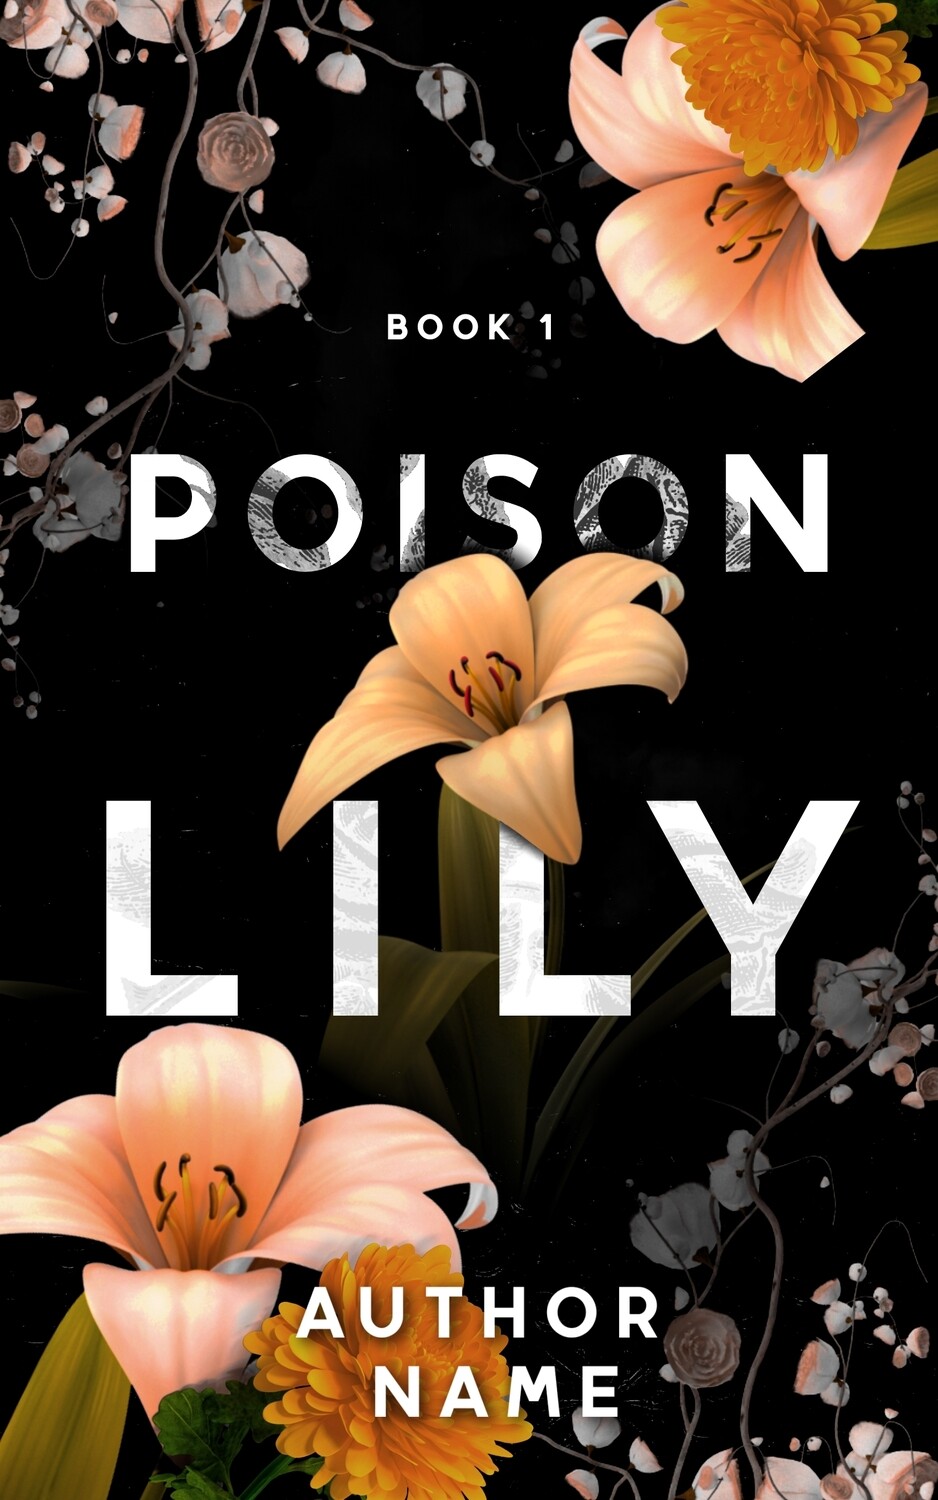 POISON LILY